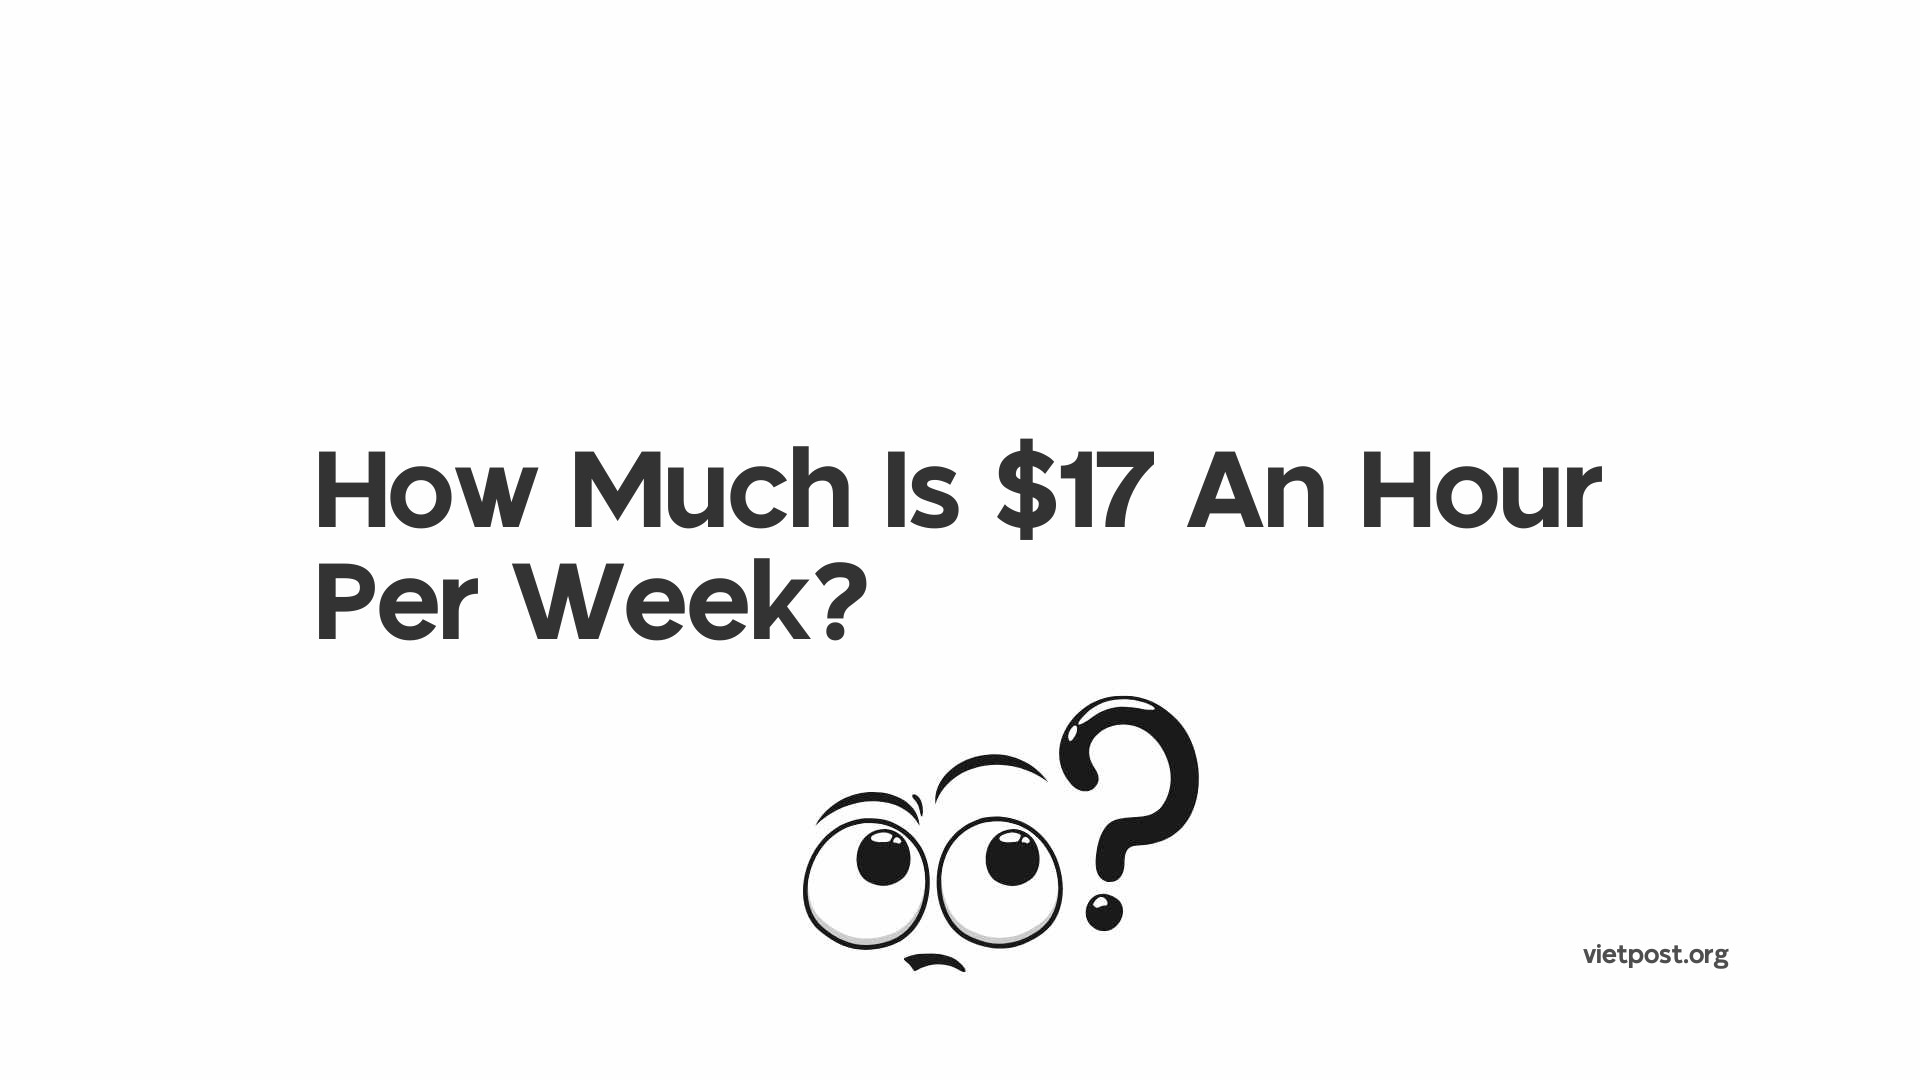 How Much Is $17 An Hour Per Week?